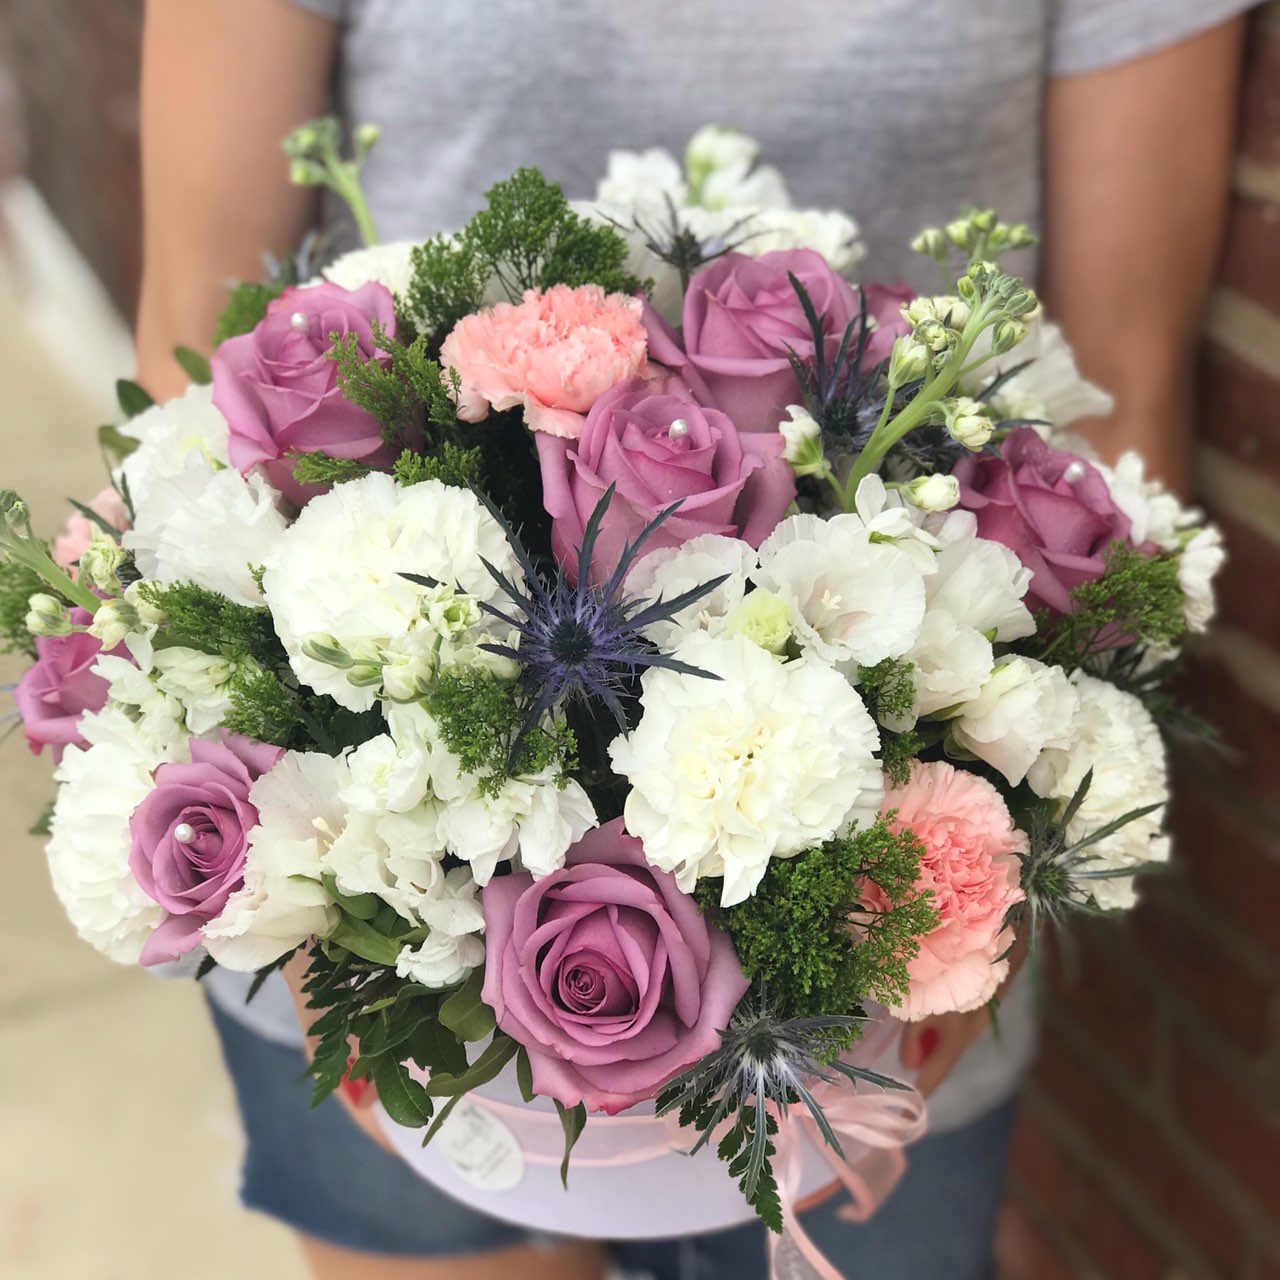 They'll fall in love with this pretty, playful bouquet!  It's a fresh mix they'll adore for any occasion.  Includes:  Purple roses, pink and white carnations, eringium, white stock, assorted greens. Velvet box Free message card